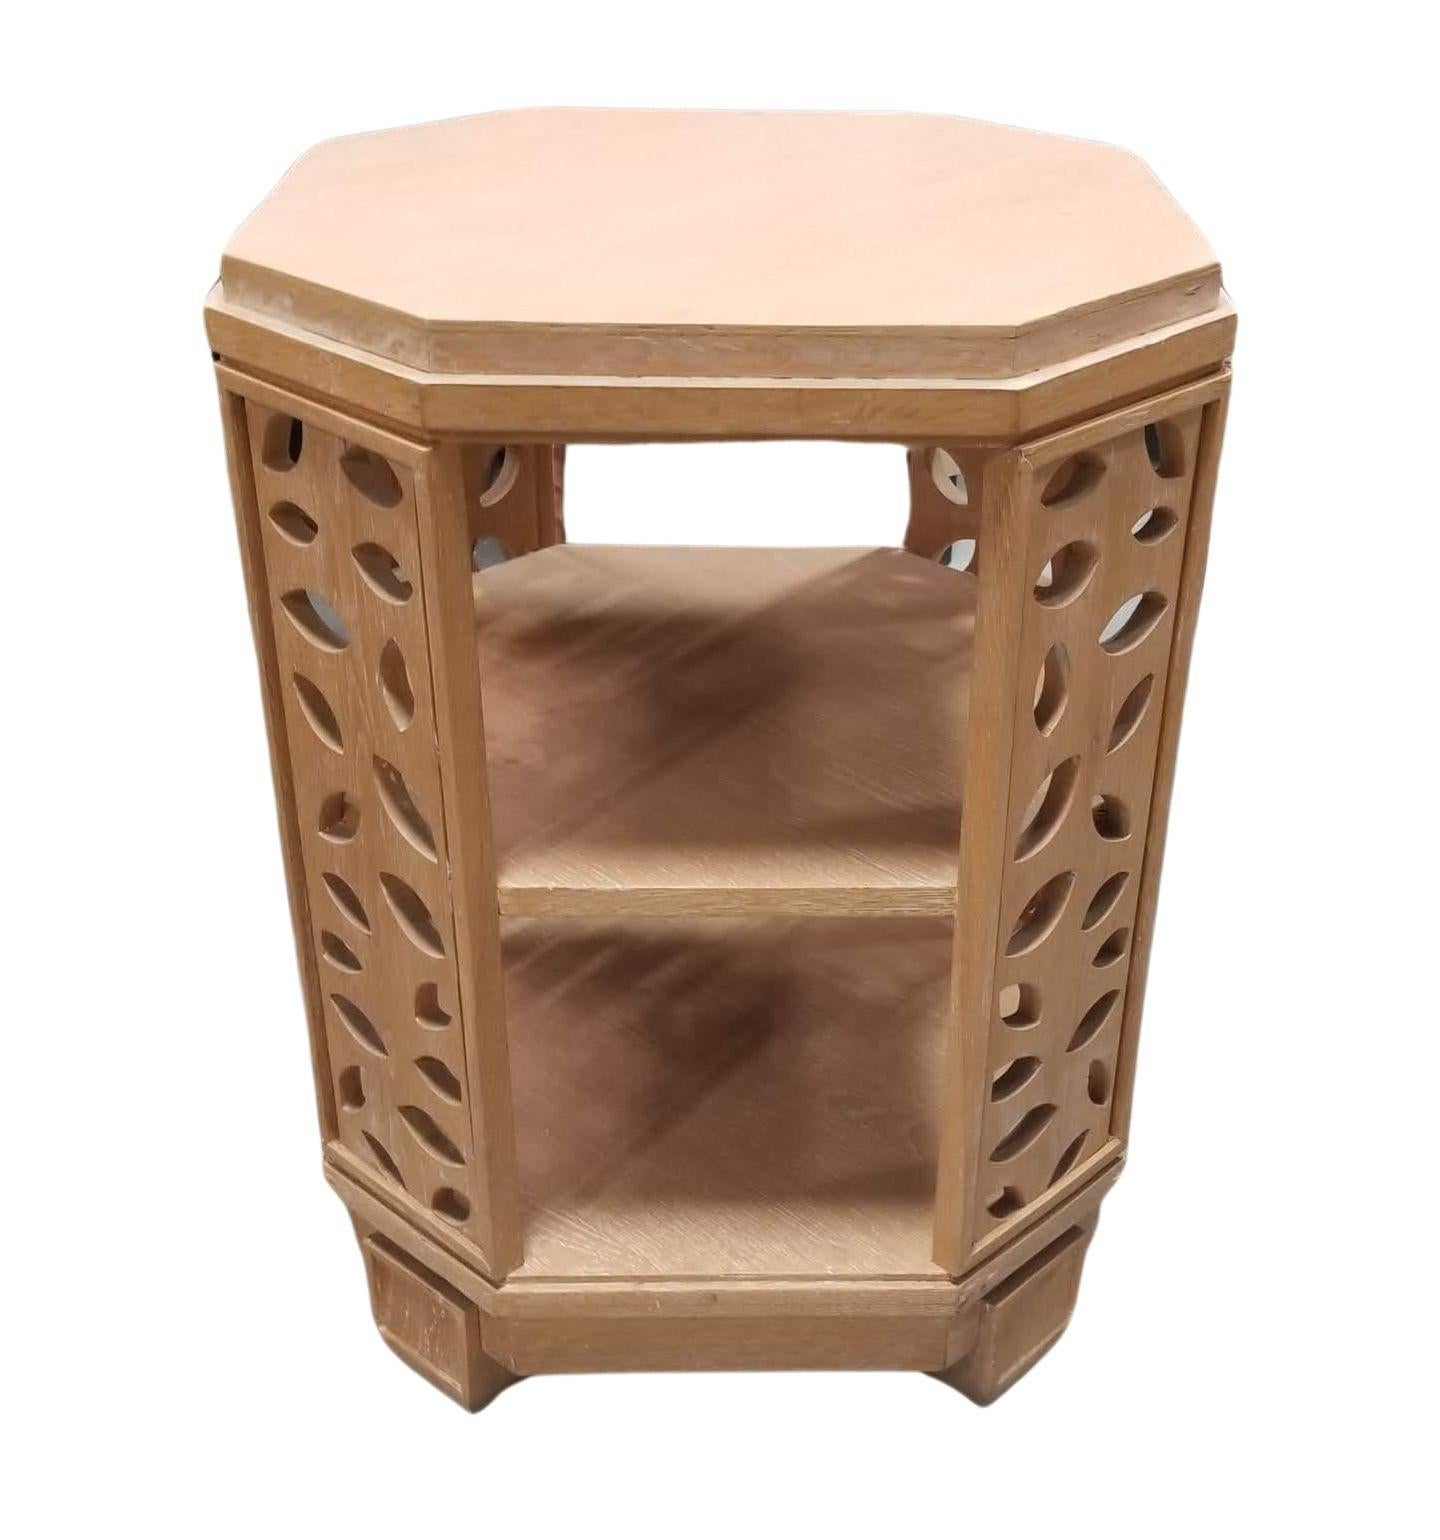 This distinctive octagonal side table, crafted from light wood, features charming botanical leaf-shaped cut-out side panels, adding a touch of nature-inspired elegance to your space. With two inner shelves, it combines form and function